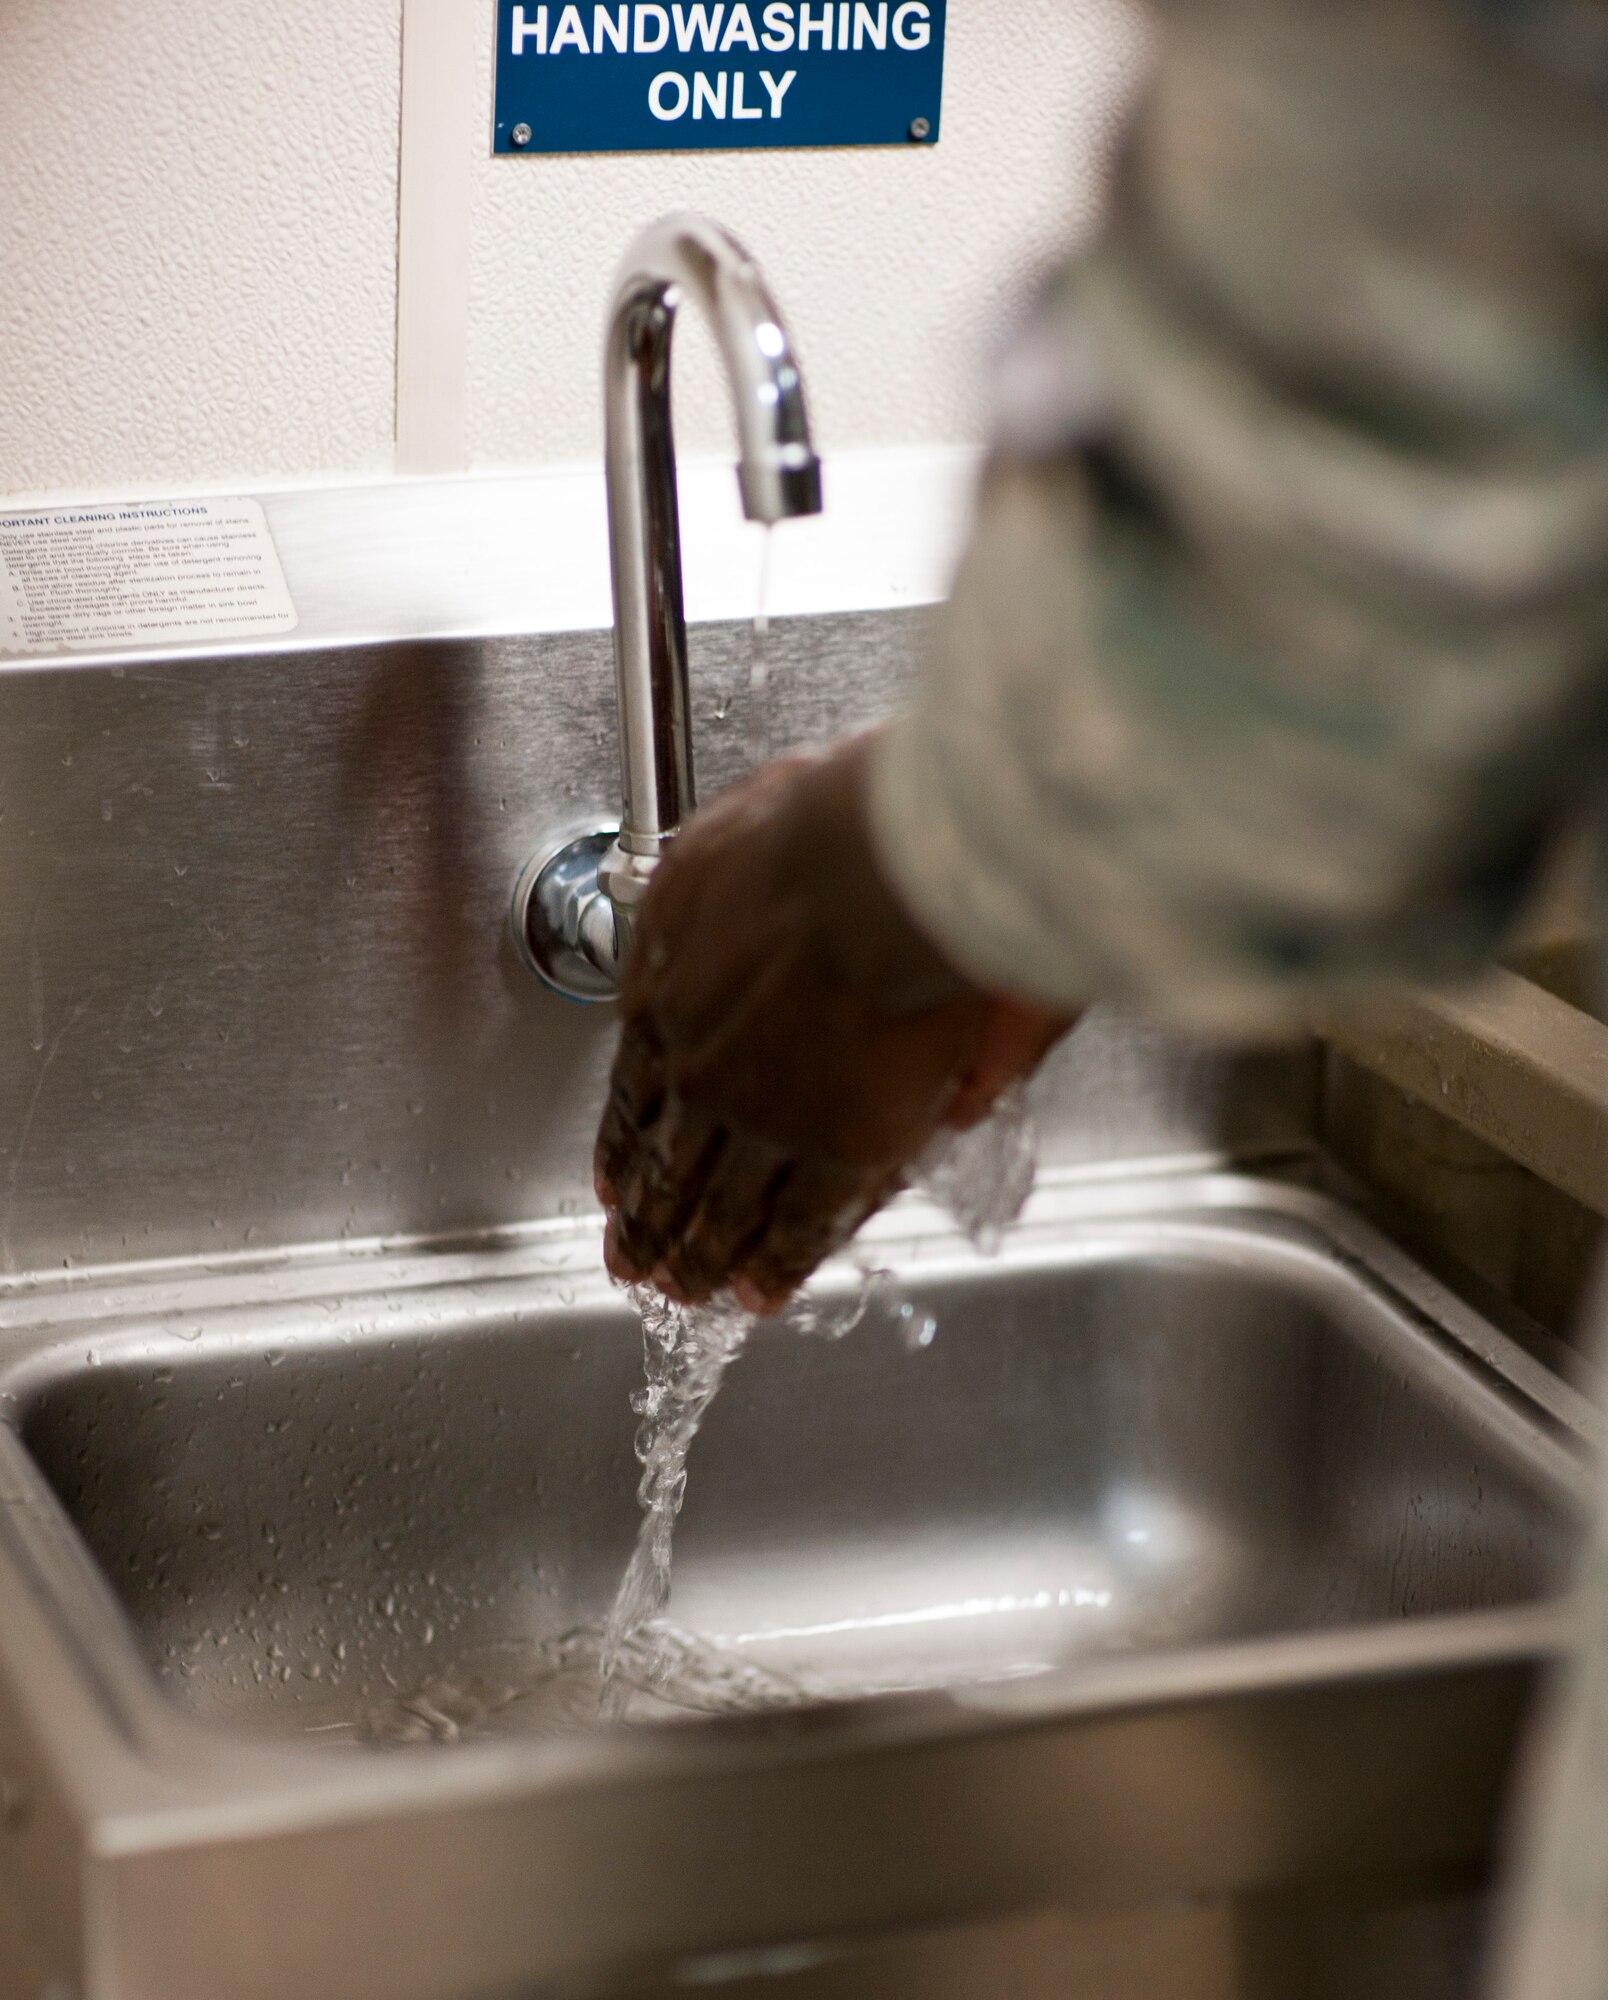 Airman 1st Class Cheikh Dieng, 1st Special Operations Force Support Squadron food service apprentice, washes his hands prior to preparing sandwiches at the Riptide Dining Facility on Hurlburt Field, Fla., Feb. 6, 2014. The flight kitchen operates 24/7 and provides pre-made supplement bags, which contain various food items. (U.S. Air Force photo/Senior Airman Krystal M. Garrett)